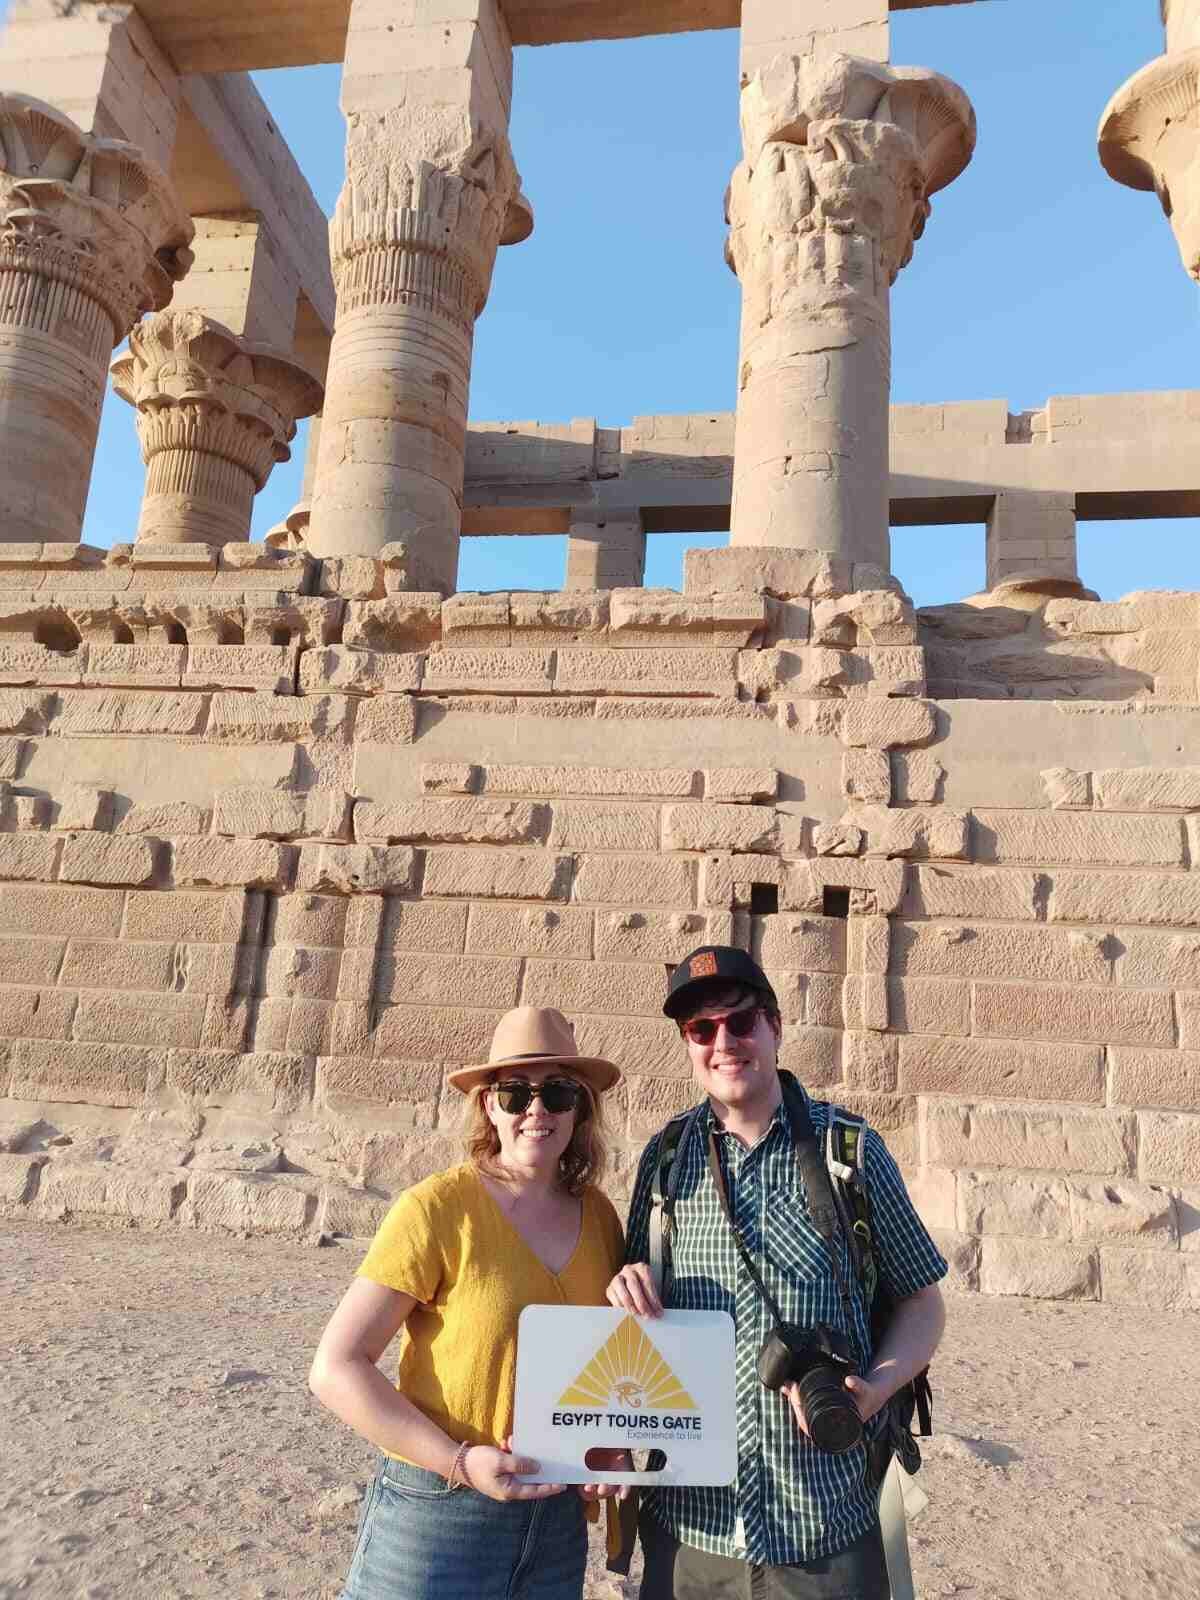 Luxor Excursions from Sharm el Sheikh by Flight